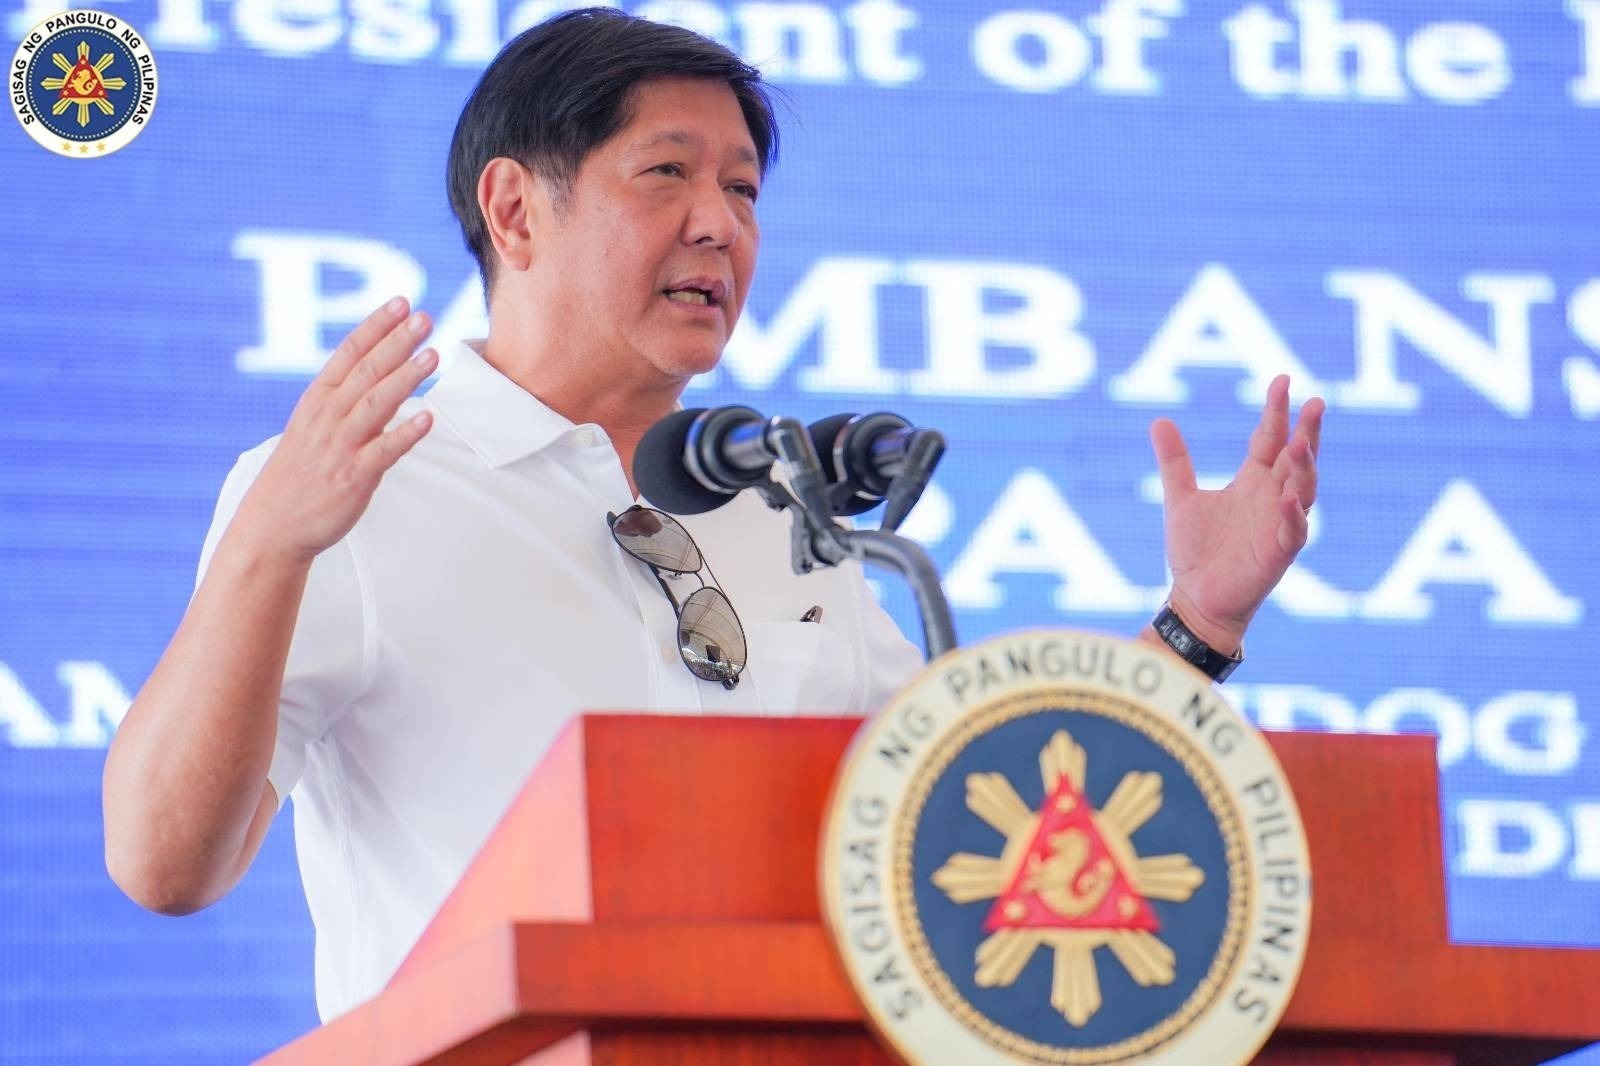 MARCOS VOWS TO EXPAND INTERNET SERVICES TO REMOTE AREAS